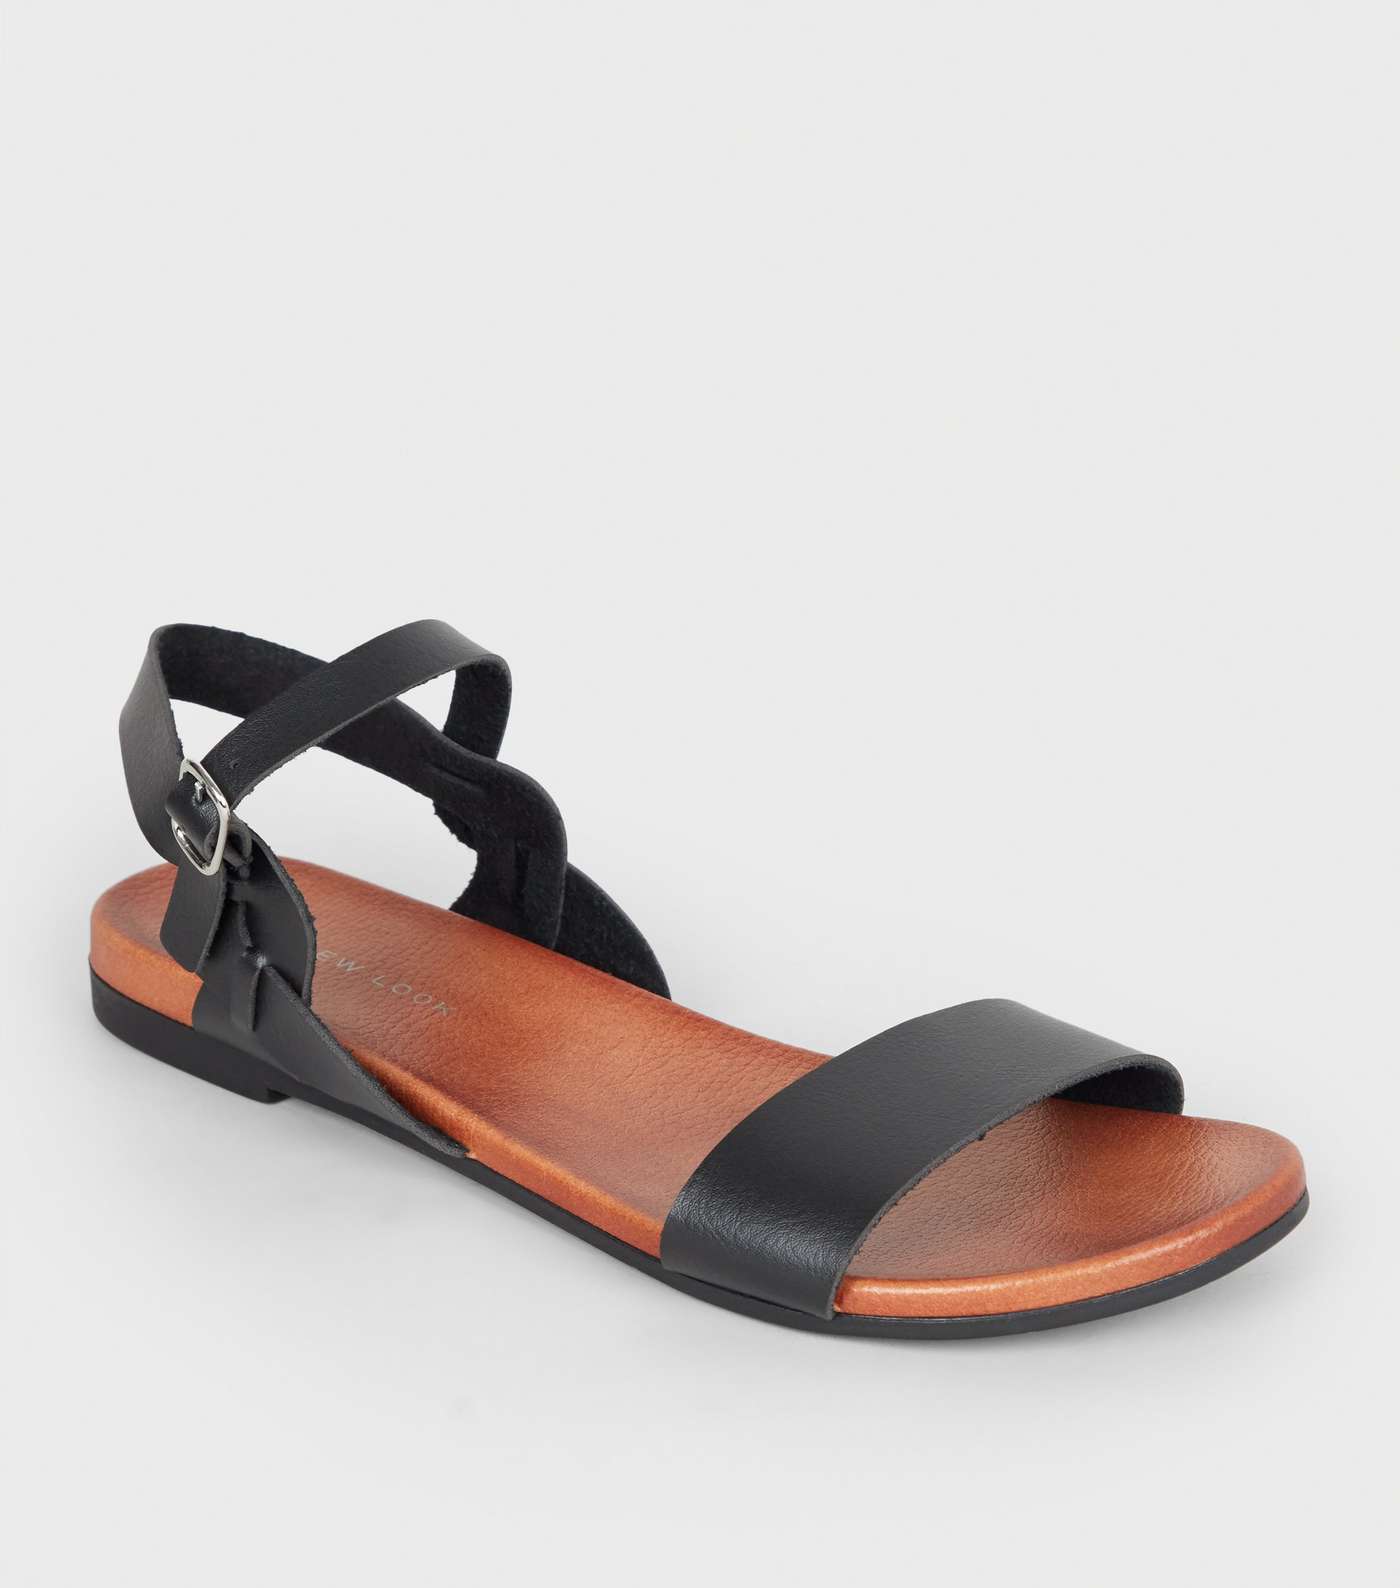 Black Leather-Look 2 Part Footbed Sandals